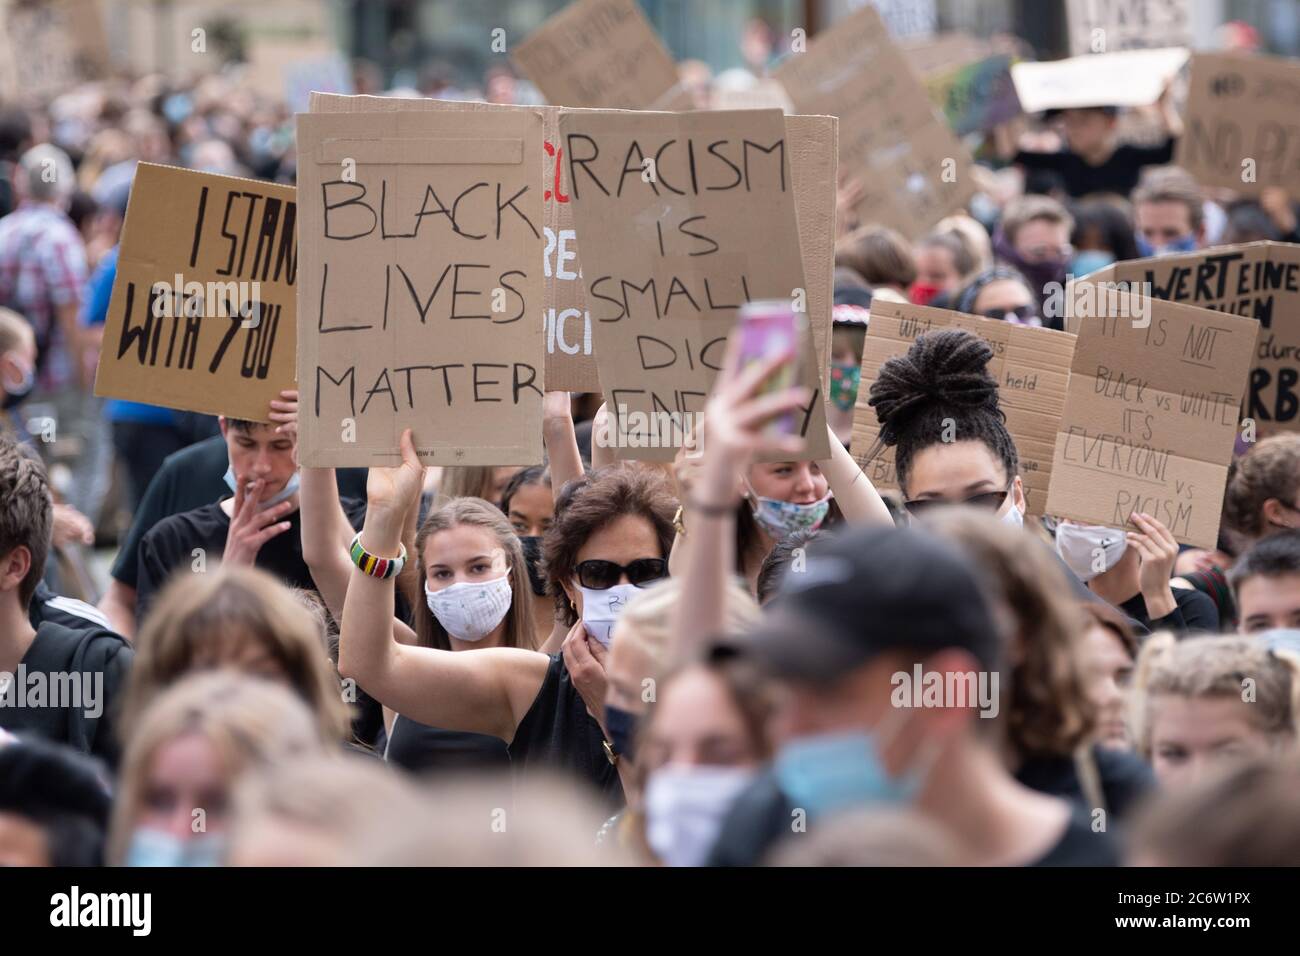 Dresden, Germany. 12th July, 2020. Participants of a demonstration against racism hold various signs and banners on the Neumarkt. The rally of the 'Black Lives Matter Dresden' - group wants to draw attention to structural racism after the violent death of George Floyd. Credit: Sebastian Kahnert/dpa-Zentralbild/dpa/Alamy Live News Stock Photo